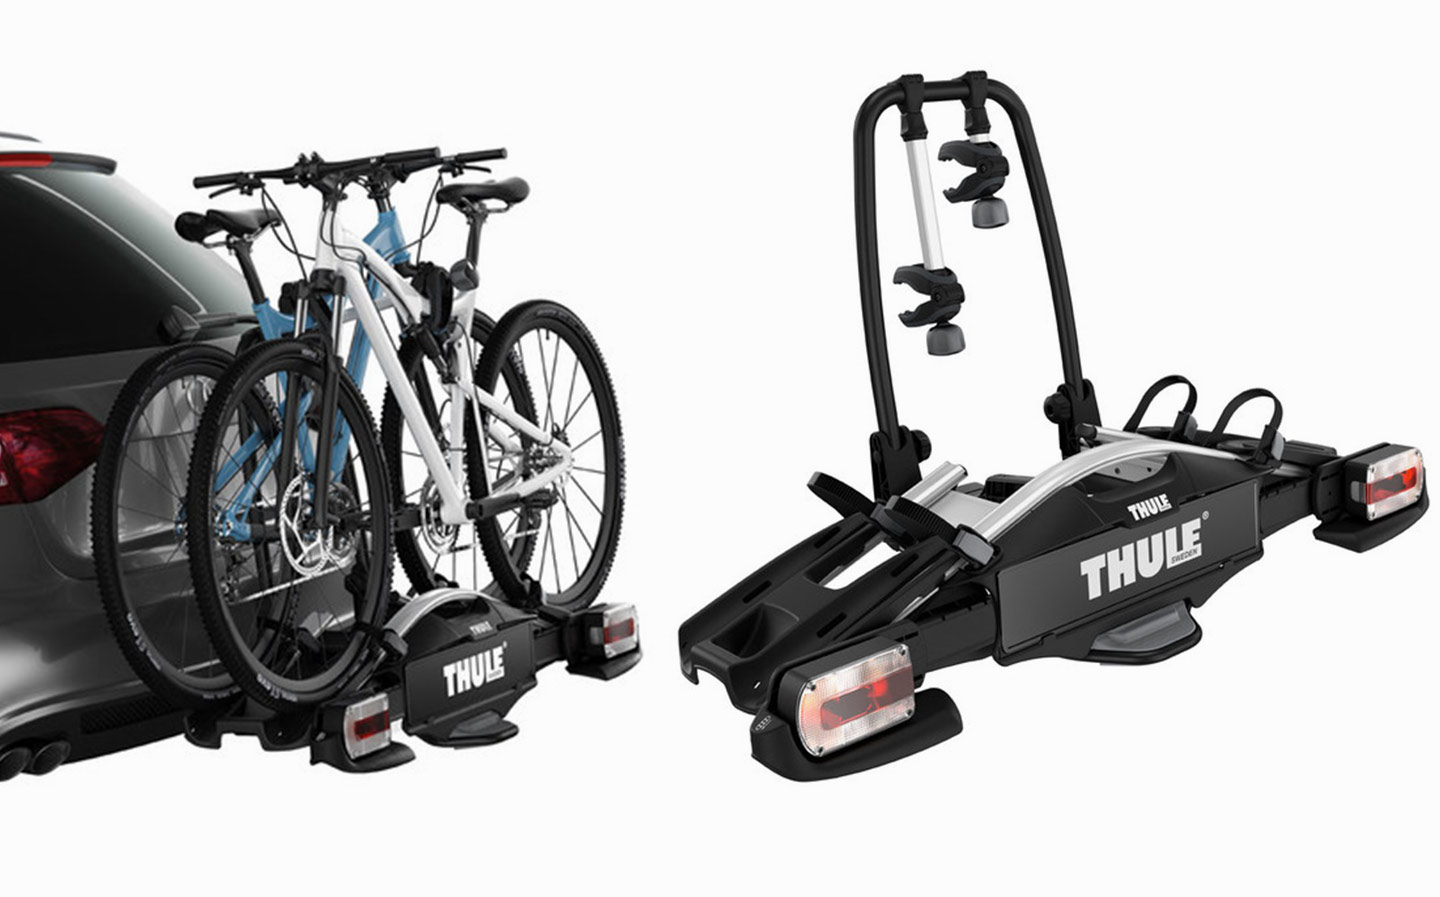 Thule Velcompact 925 two bike bicycle carrier review